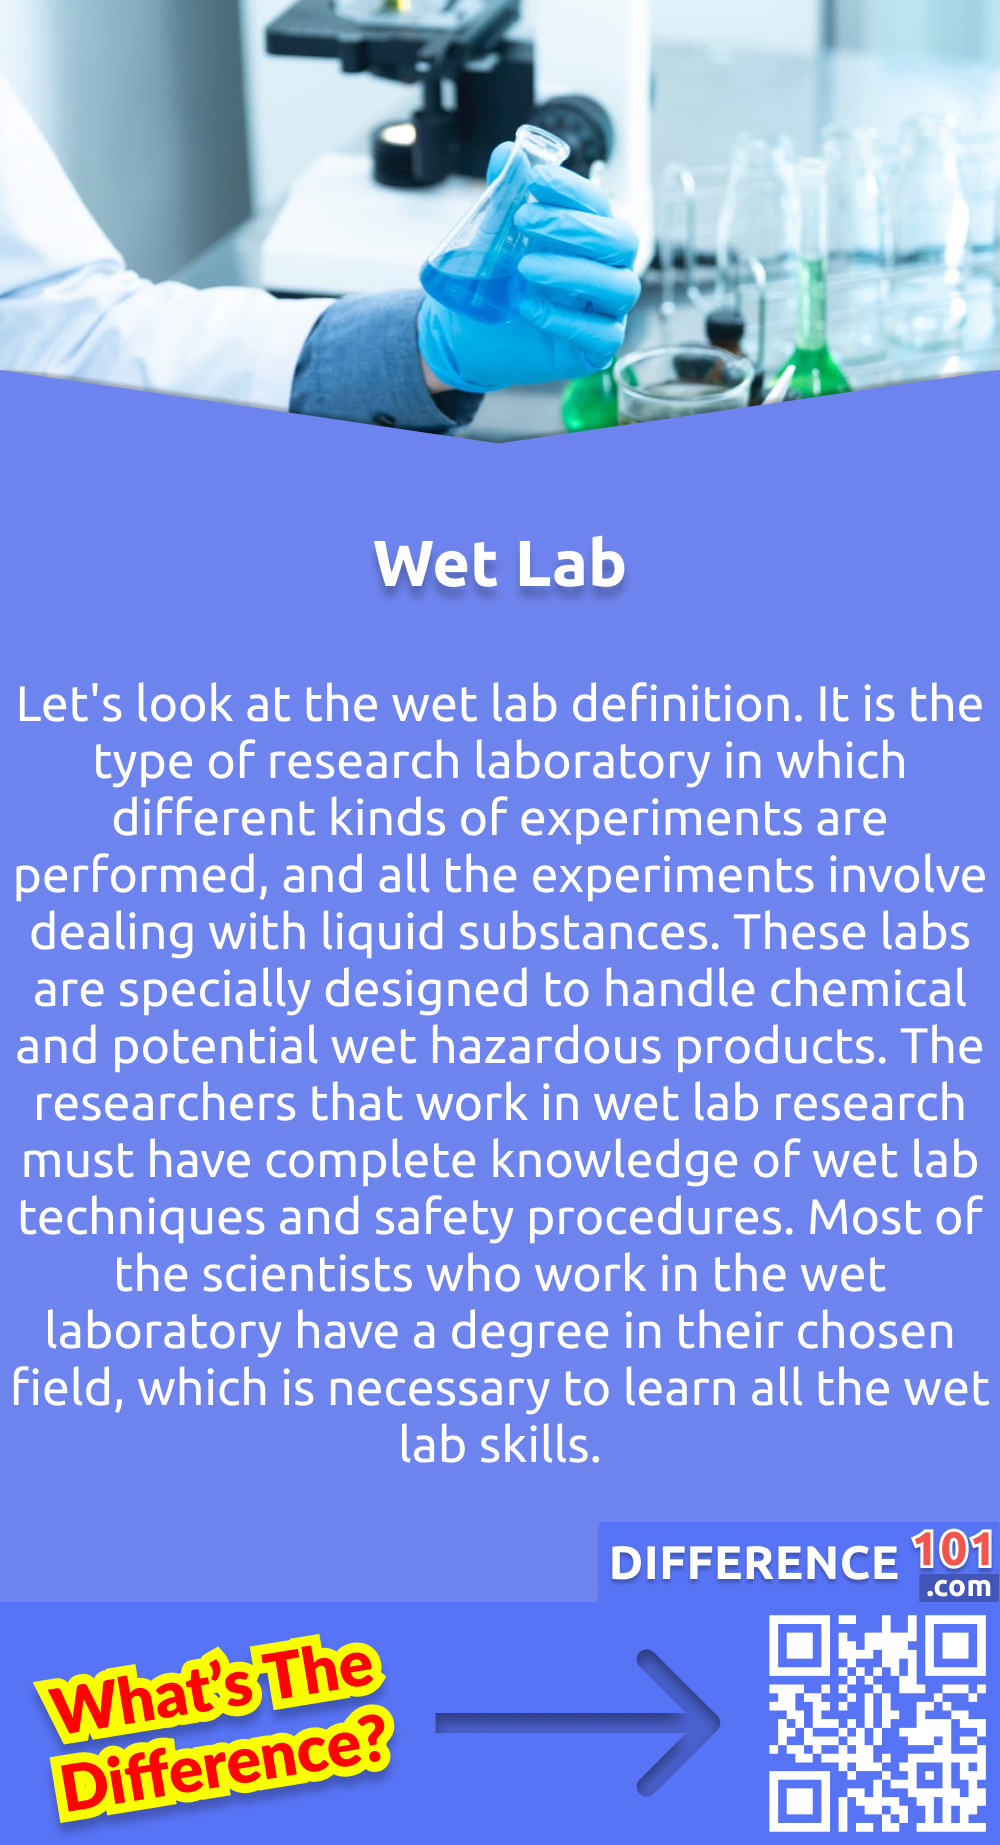 What is a Wet Lab? Let's look at the wet lab definition. It is the type of research laboratory in which different kinds of experiments are performed, and all the experiments involve dealing with liquid substances. These labs are specially designed to handle chemical and potential wet hazardous products. The researchers that work in wet lab research must have complete knowledge of wet lab techniques and safety procedures. Most of the scientists who work in the wet laboratory have a degree in their chosen field, which is necessary to learn all the wet lab skills.